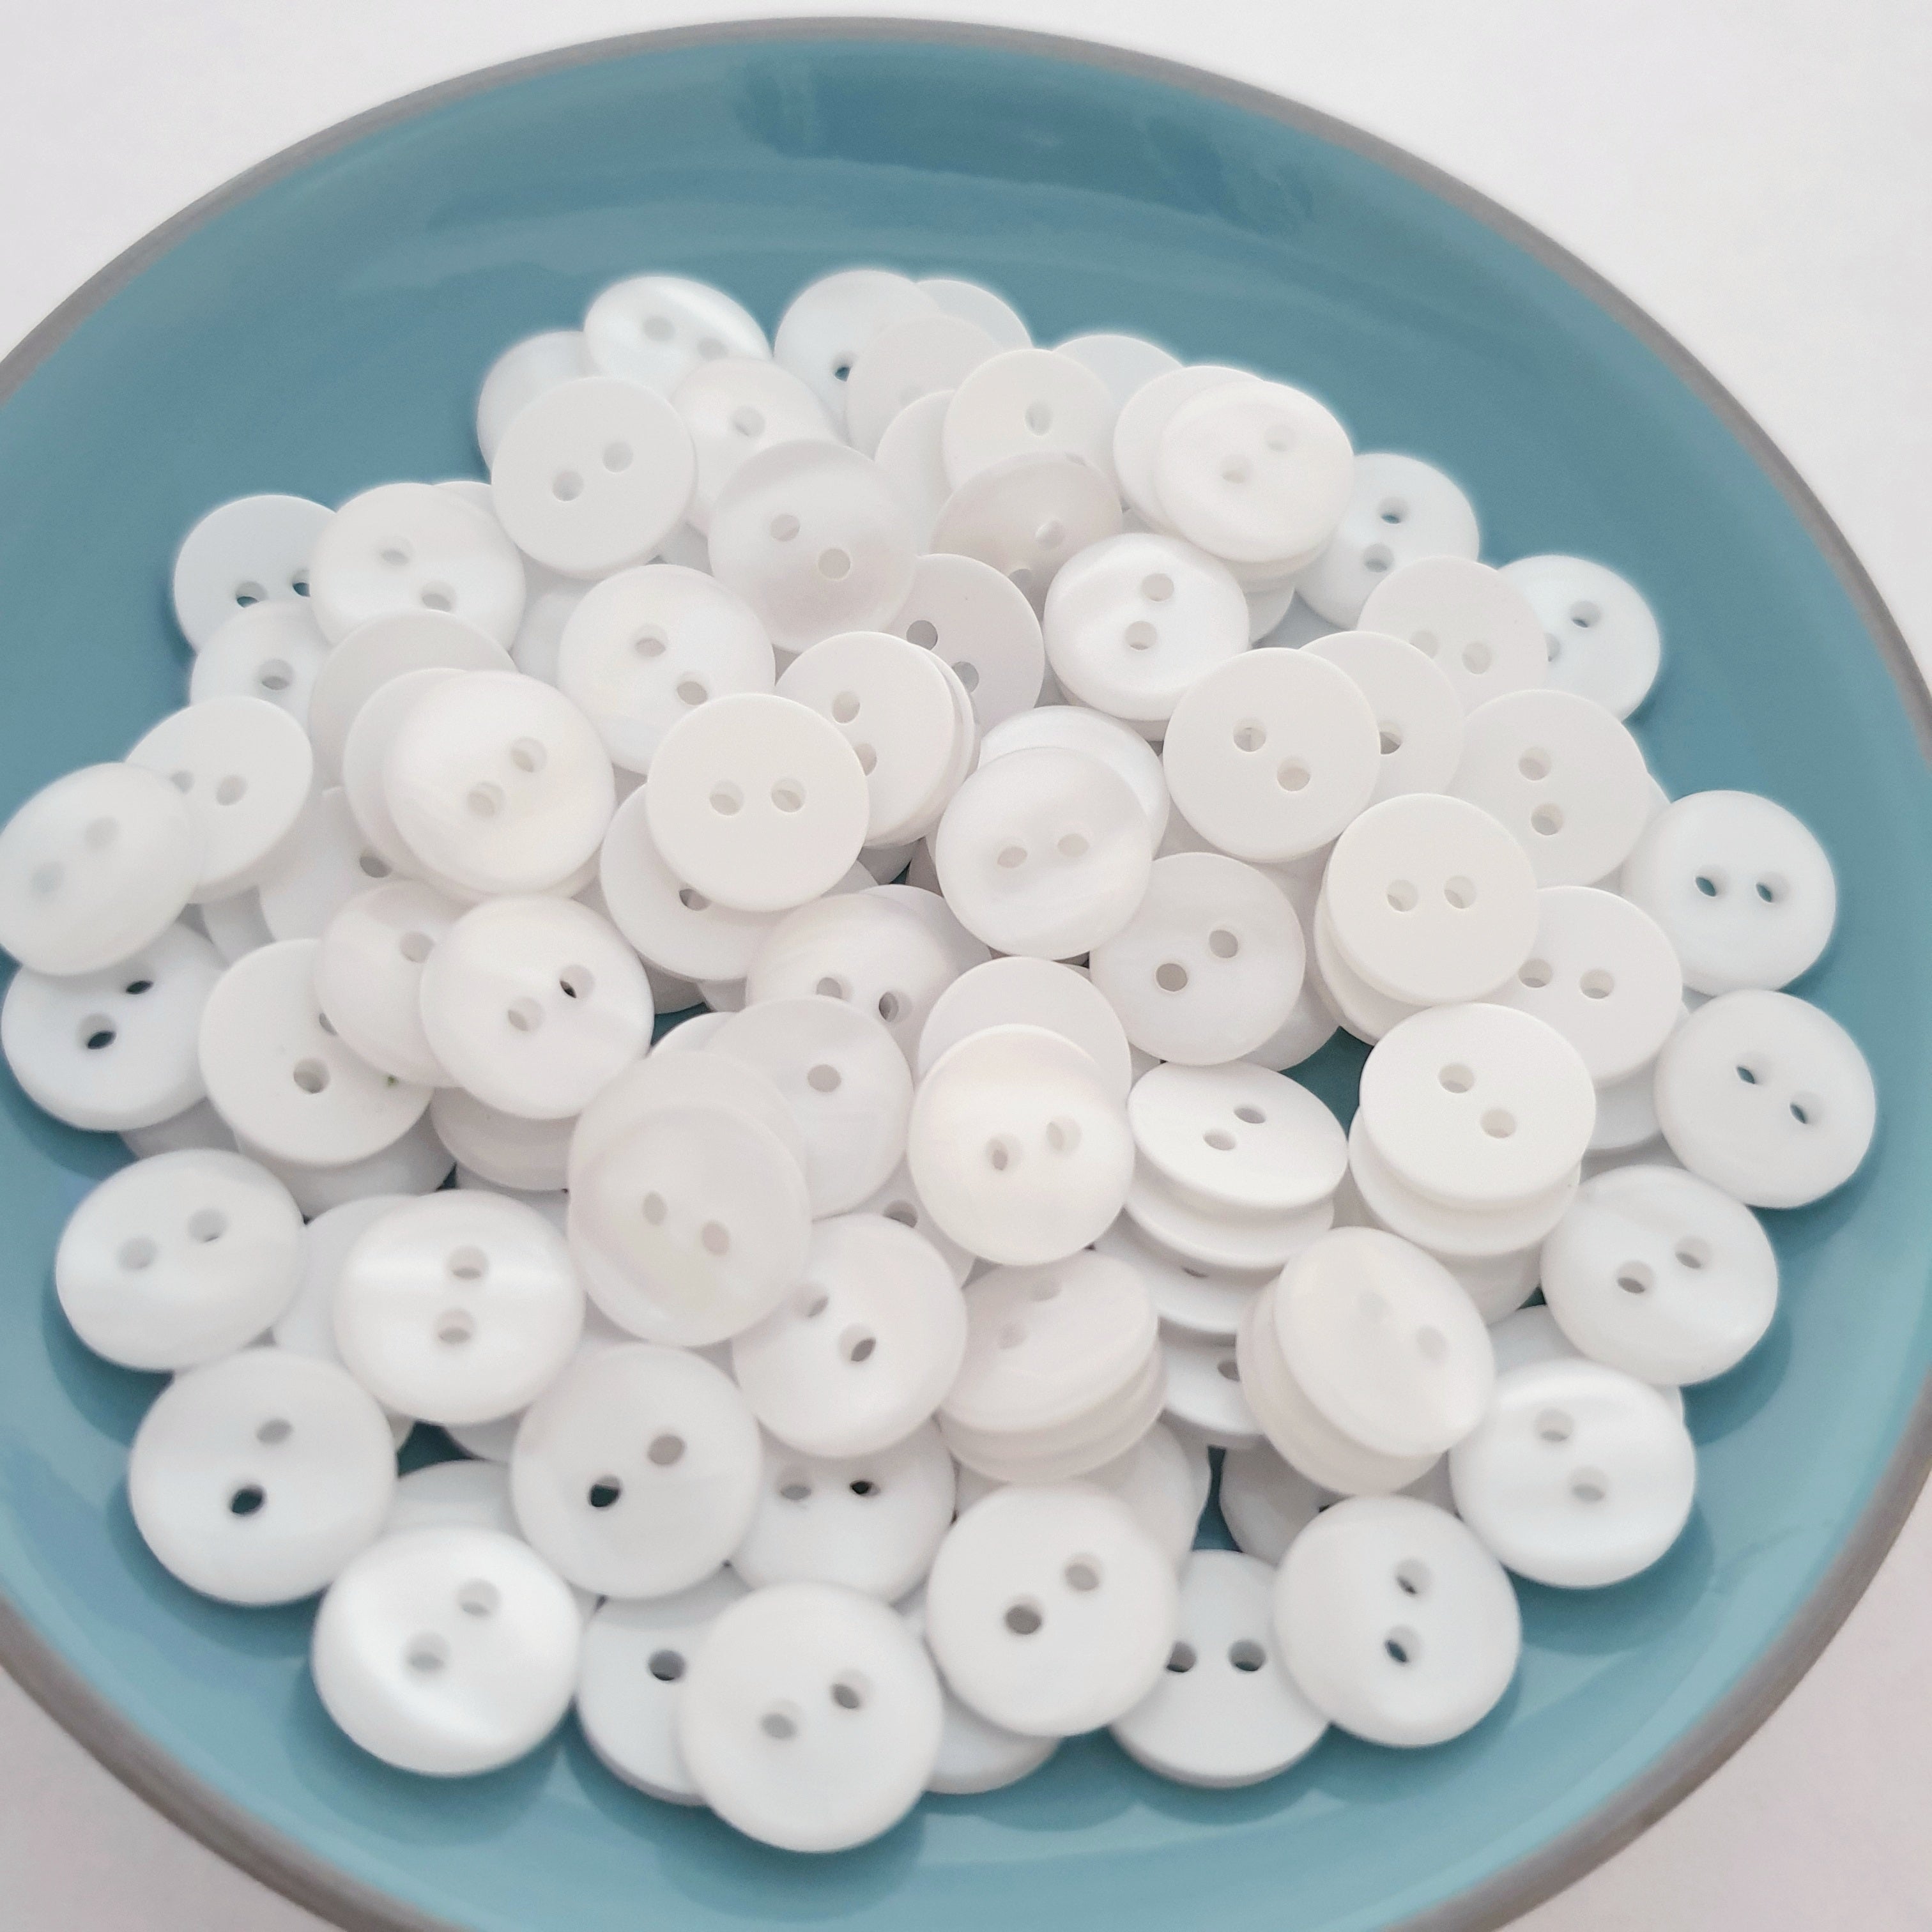 MajorCrafts 80pcs 10mm White Pearlescent 2 Holes Small Round Resin Sewing Buttons